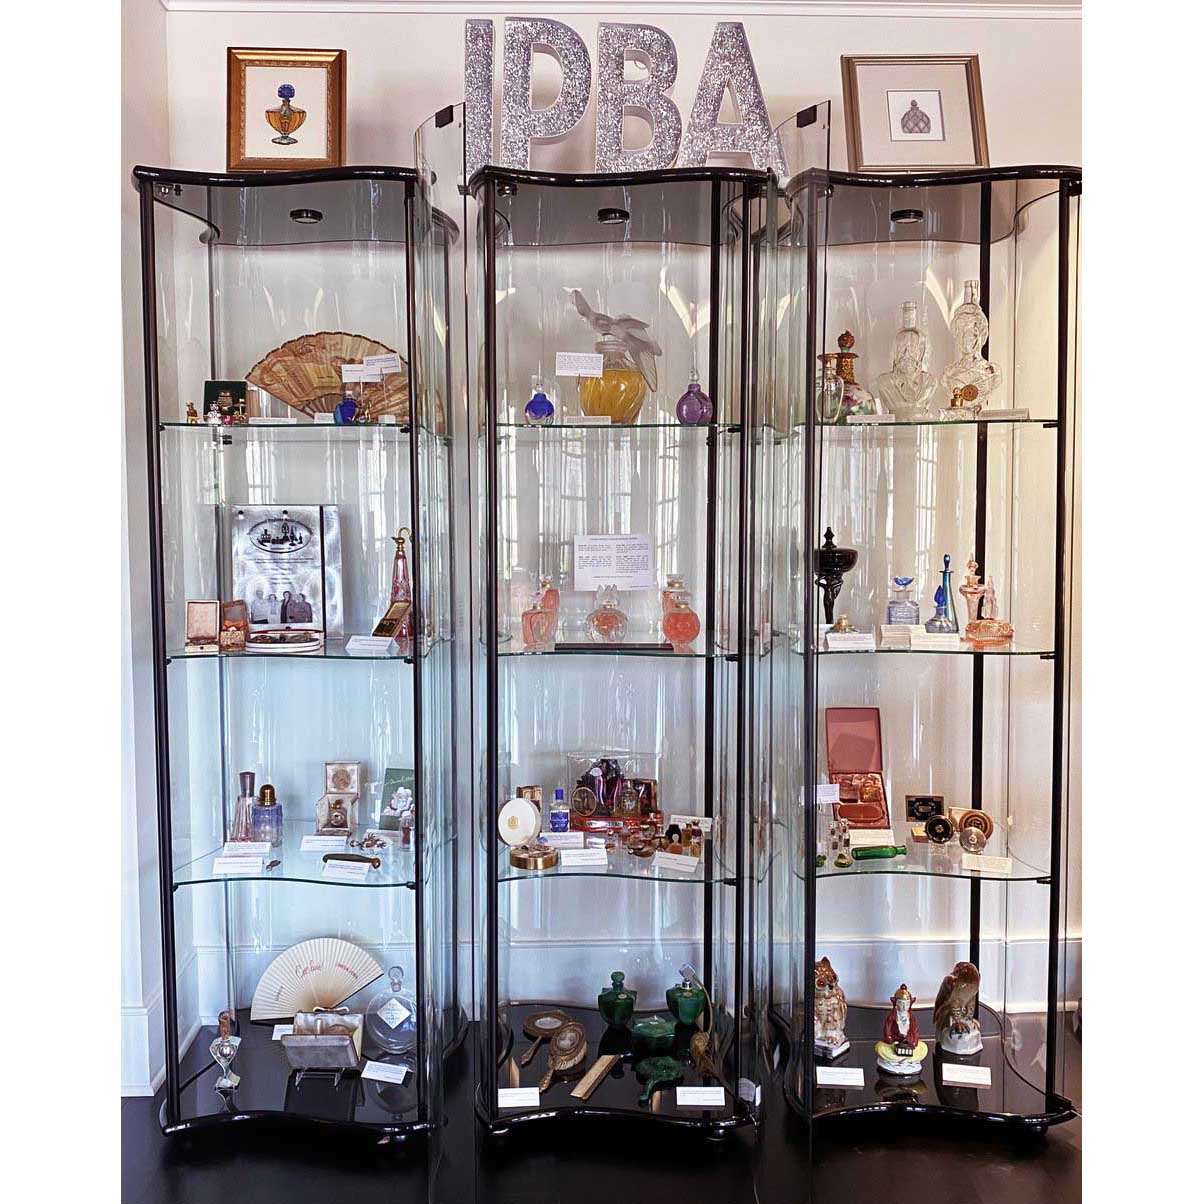 IPBA collection